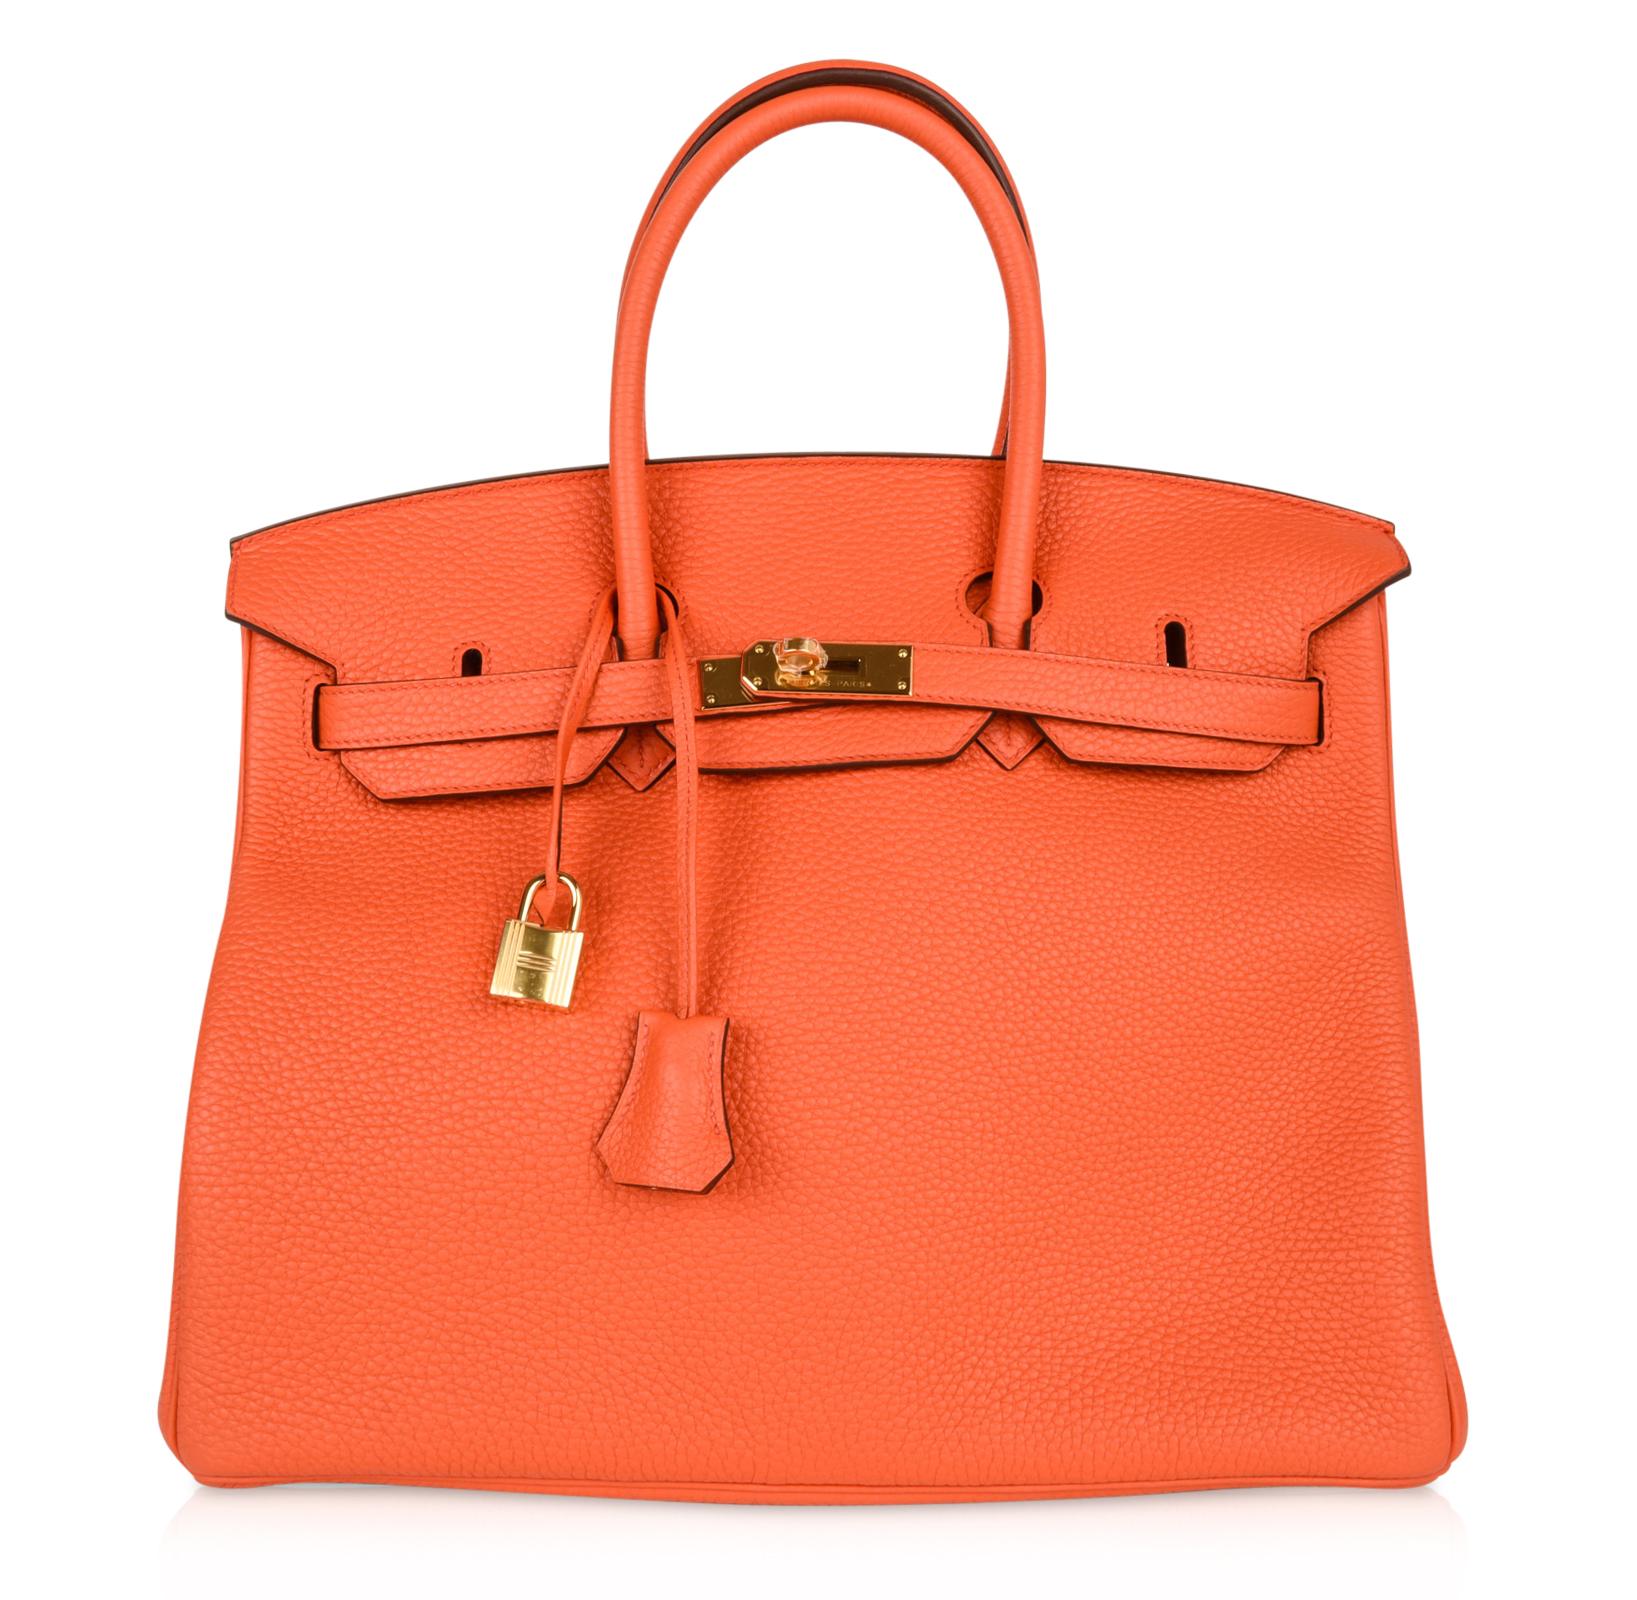 Guaranteed authentic Hermes Birkin 35 chic pop of color - beautiful Orange Poppy - fabulous for year round wear.
Lush with Gold hardware.
Please see the same bag available in 25 cm. 
Comes with lock, keys, clochette, sleeper, signature HERMES box